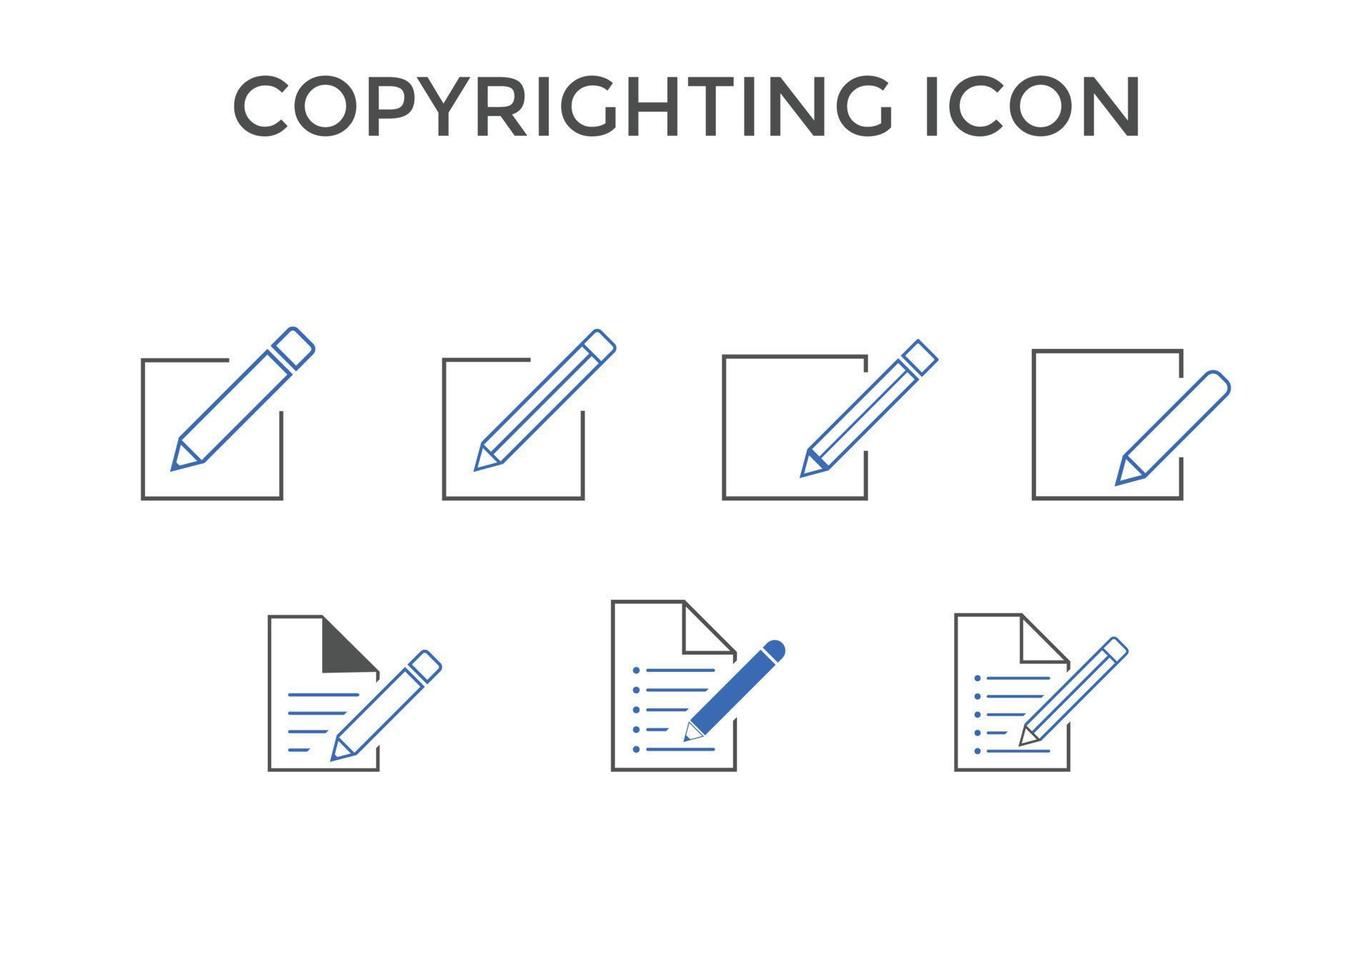 Set of Copyrighting icons Vector illustration. Copywriting icons for seo and website